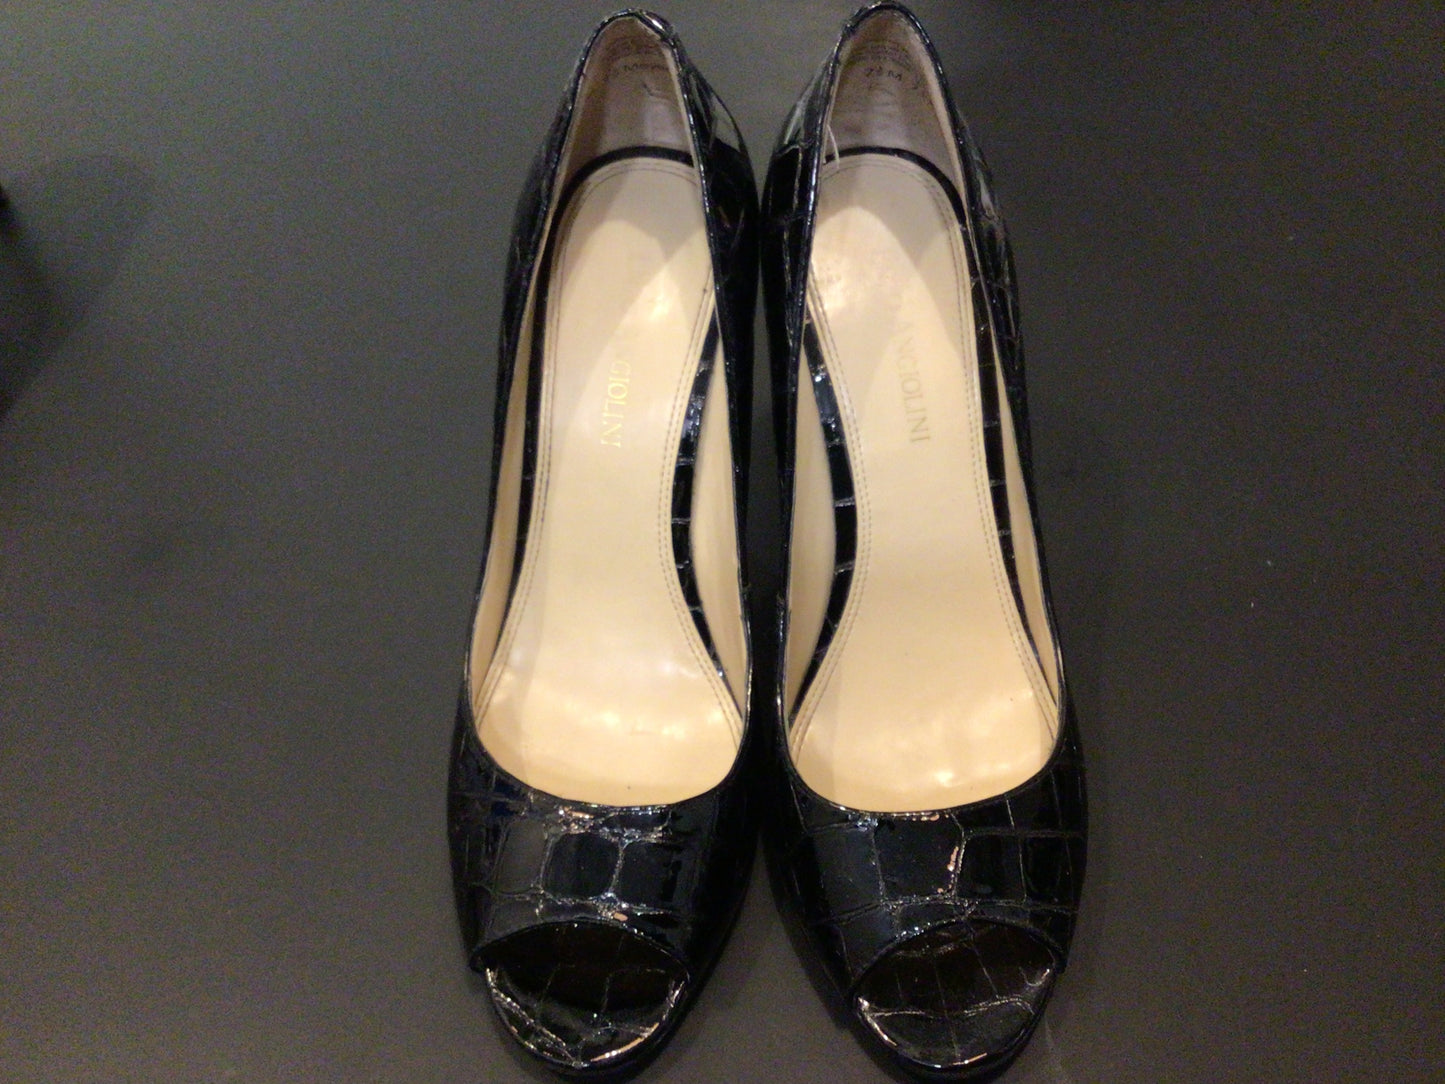 Consignment 8006-62 Enzo Angiolini black patent leather peep toes shoes. Size 7.5 M.